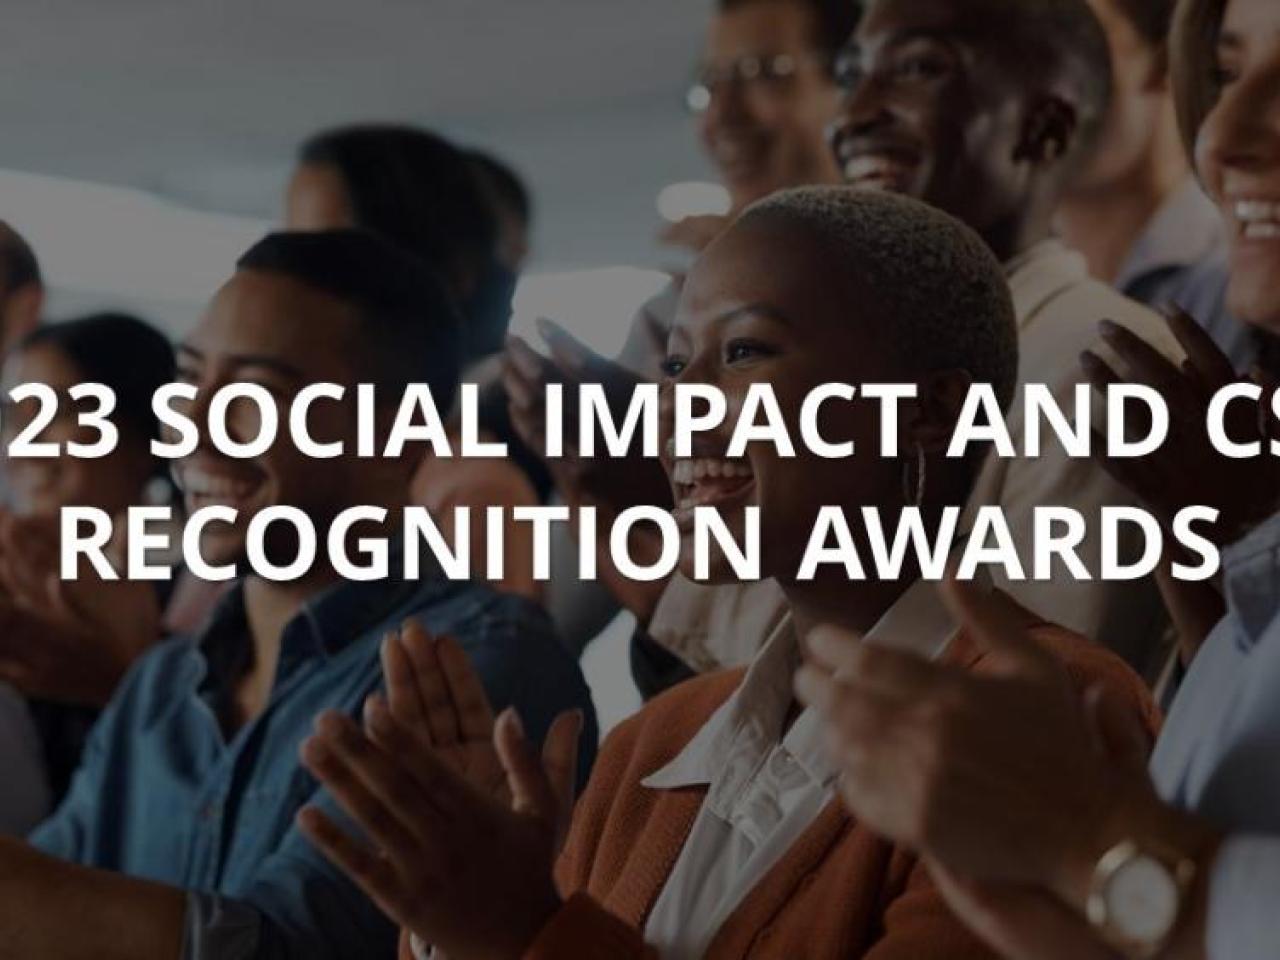 2023 Social Impact and CSR Recognition Awards